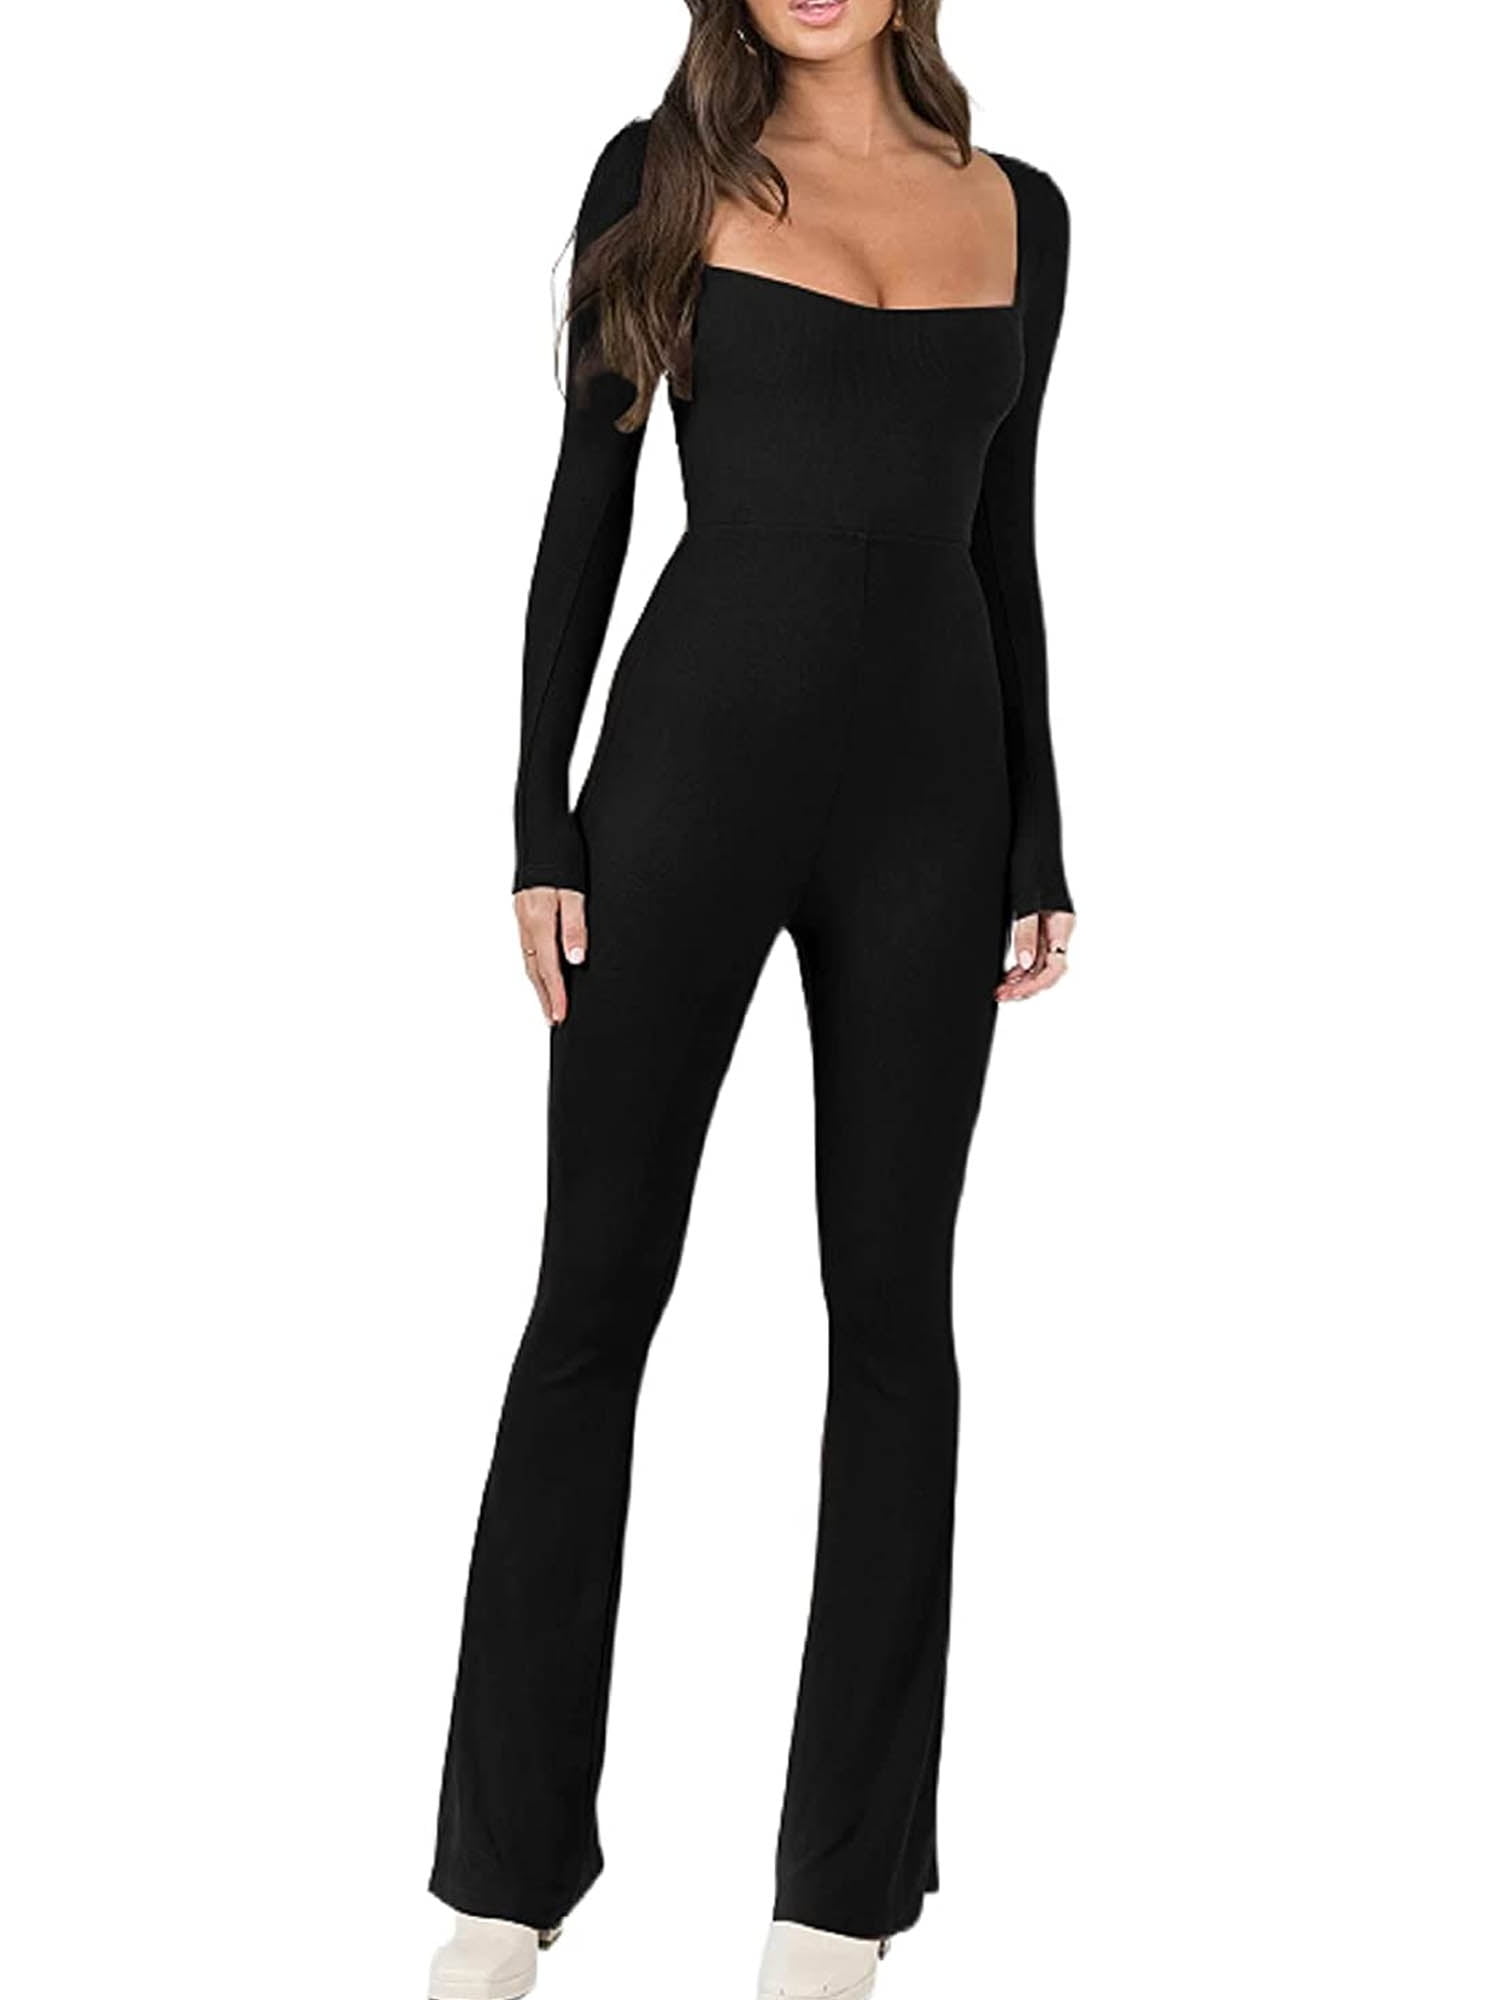 Women Sexy Ribbed Yoga Jumpsuit Long Sleeve Square Neck Bodycon Flared  Pants Workout One Piece Bodysuit 